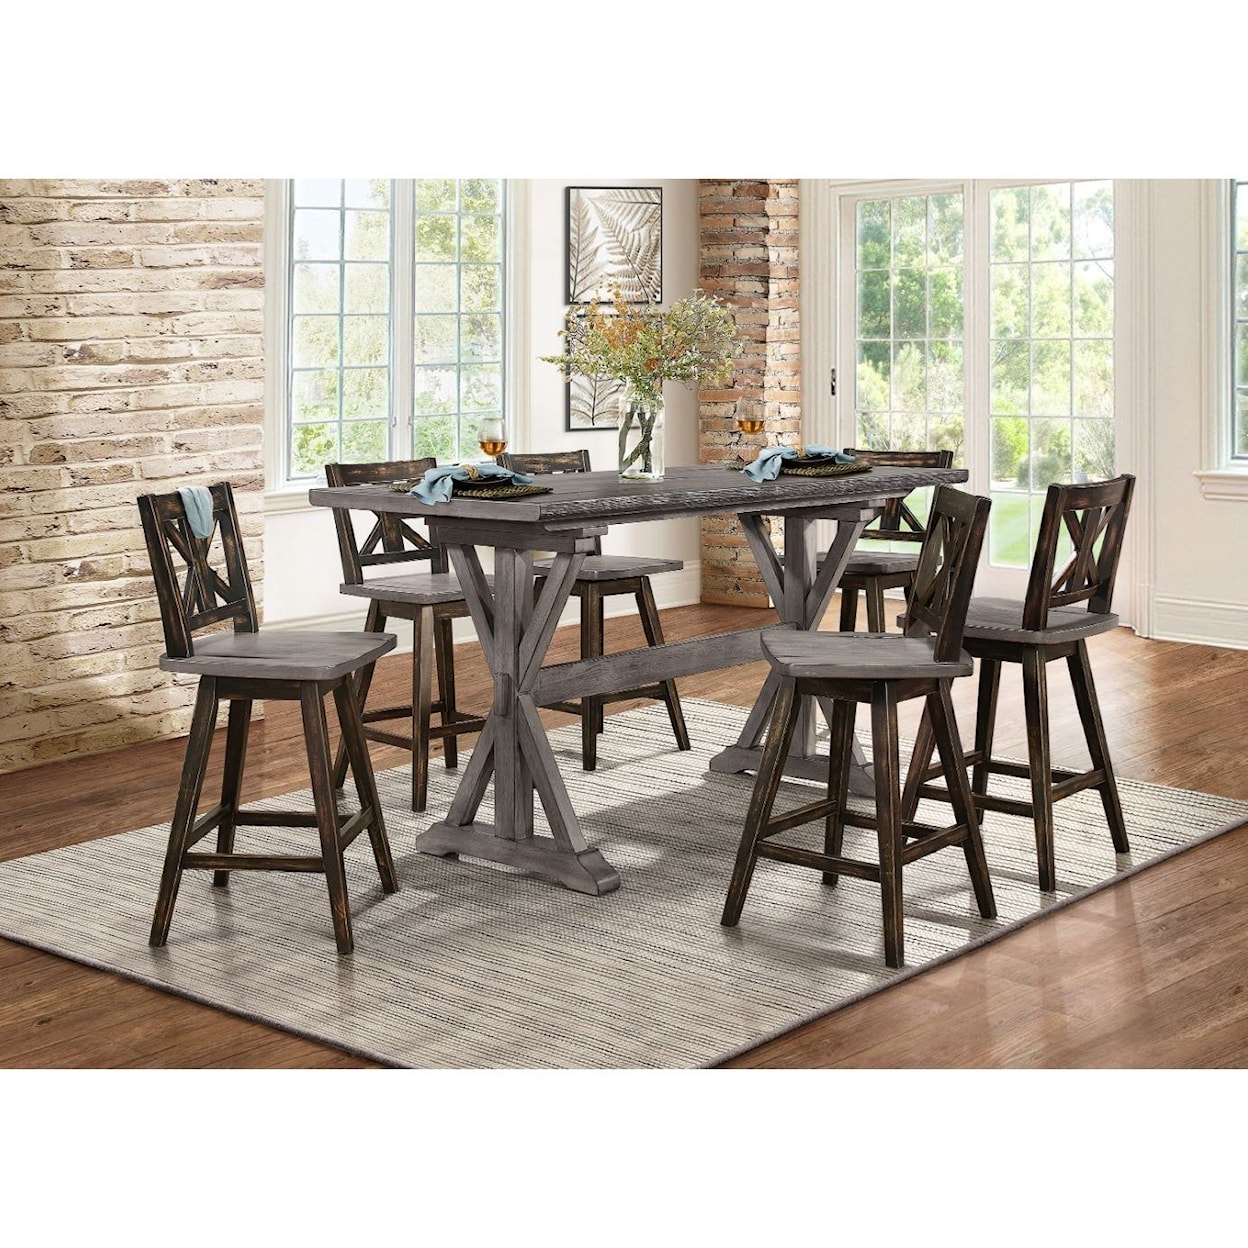 Homelegance Amsonia 7-Piece Counter Height Dining Set